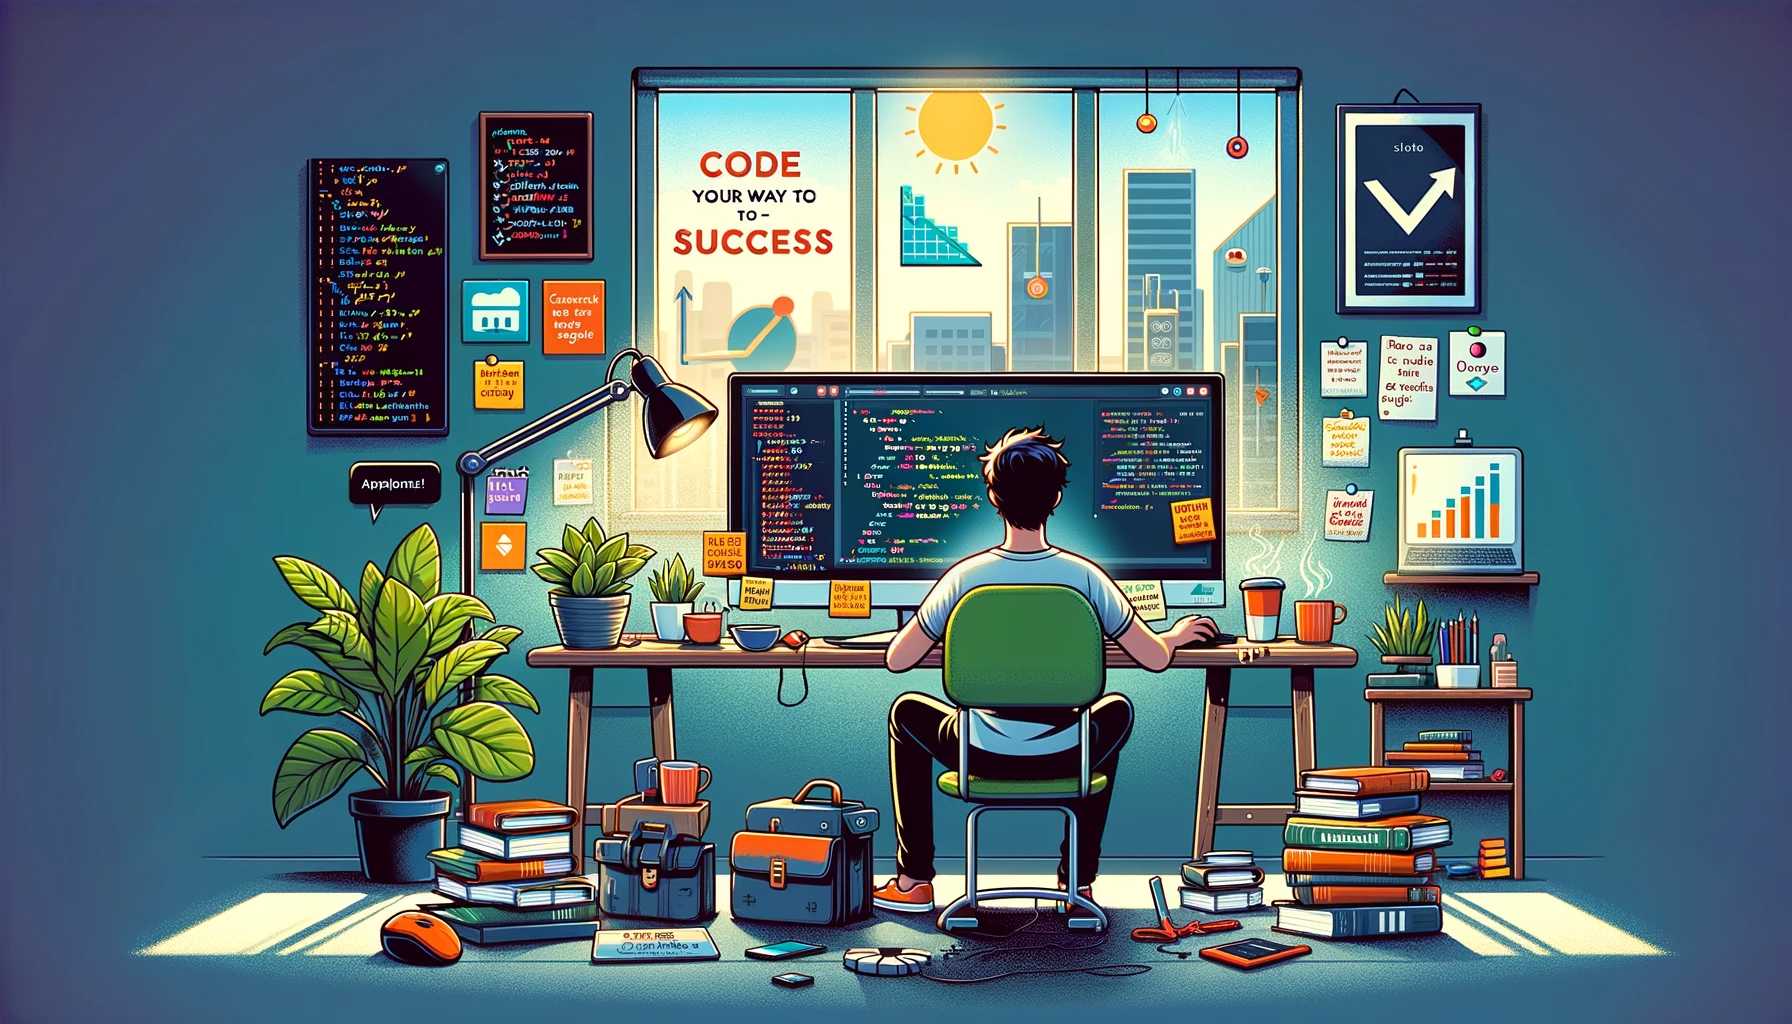 Code Your Way to Success: How to Get a Job as a Self-Taught Developer